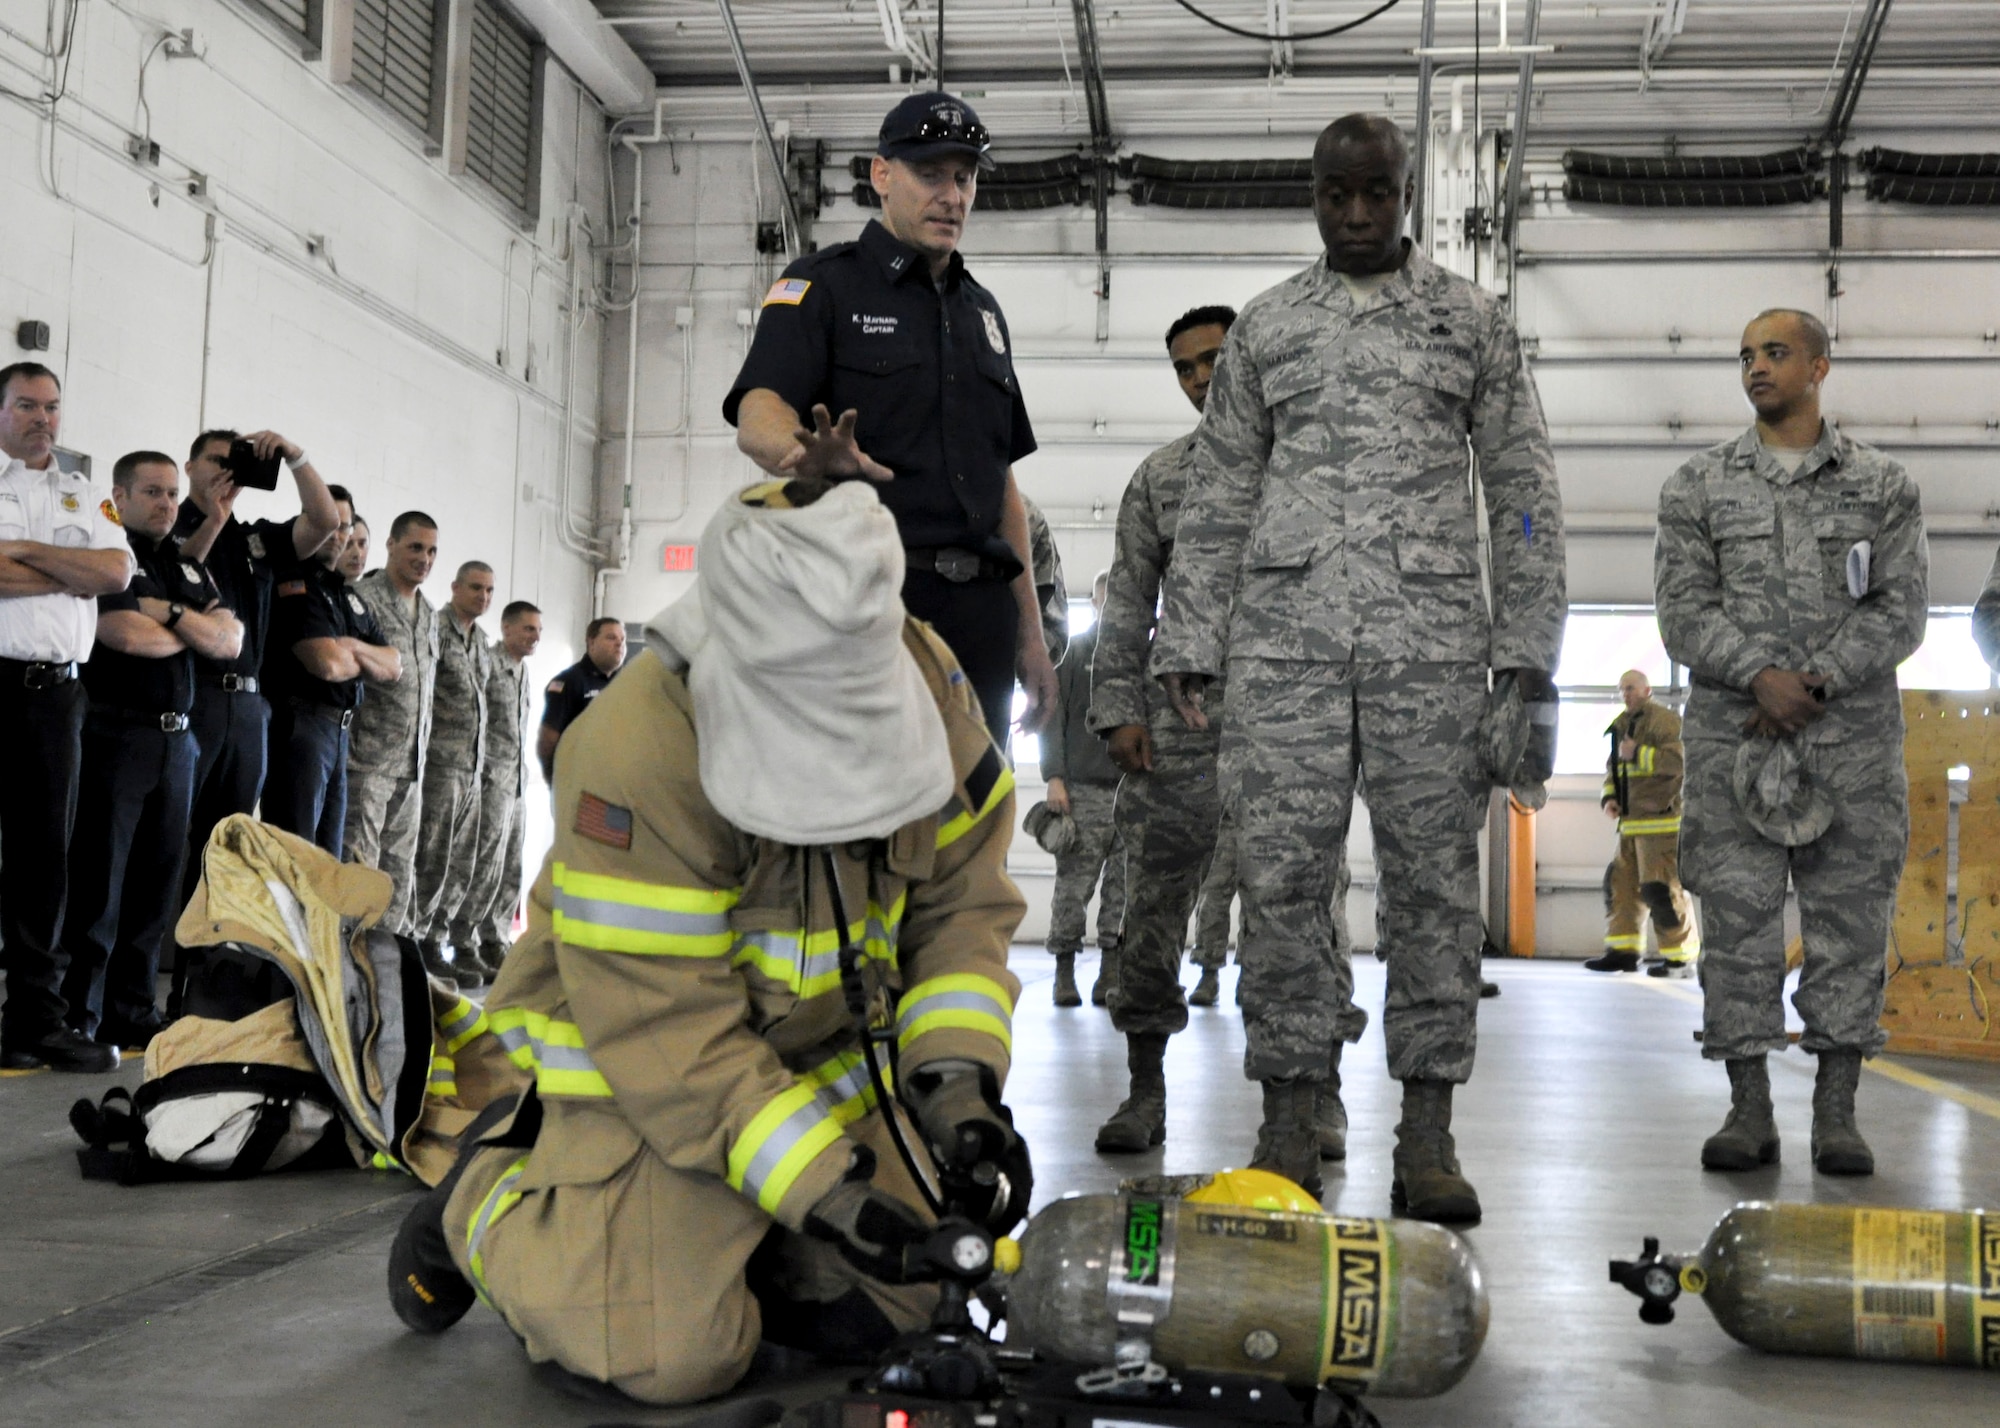 Kristofer Maynard, 92nd Civil Engineer Squadron firefighter, explains to Brig. Gen. Stacey Hawkins, Air Mobility Command director of logistics, engineering and force protection, some of the training firefighters go through during a base tour Nov. 7, 2016, at Fairchild Air Force Base, Wash. One aspect of firefighter training is putting an oxygen tank together and equipping it while blindfolded. (U.S. Air Force photo/Airman 1st Class Taylor Shelton)